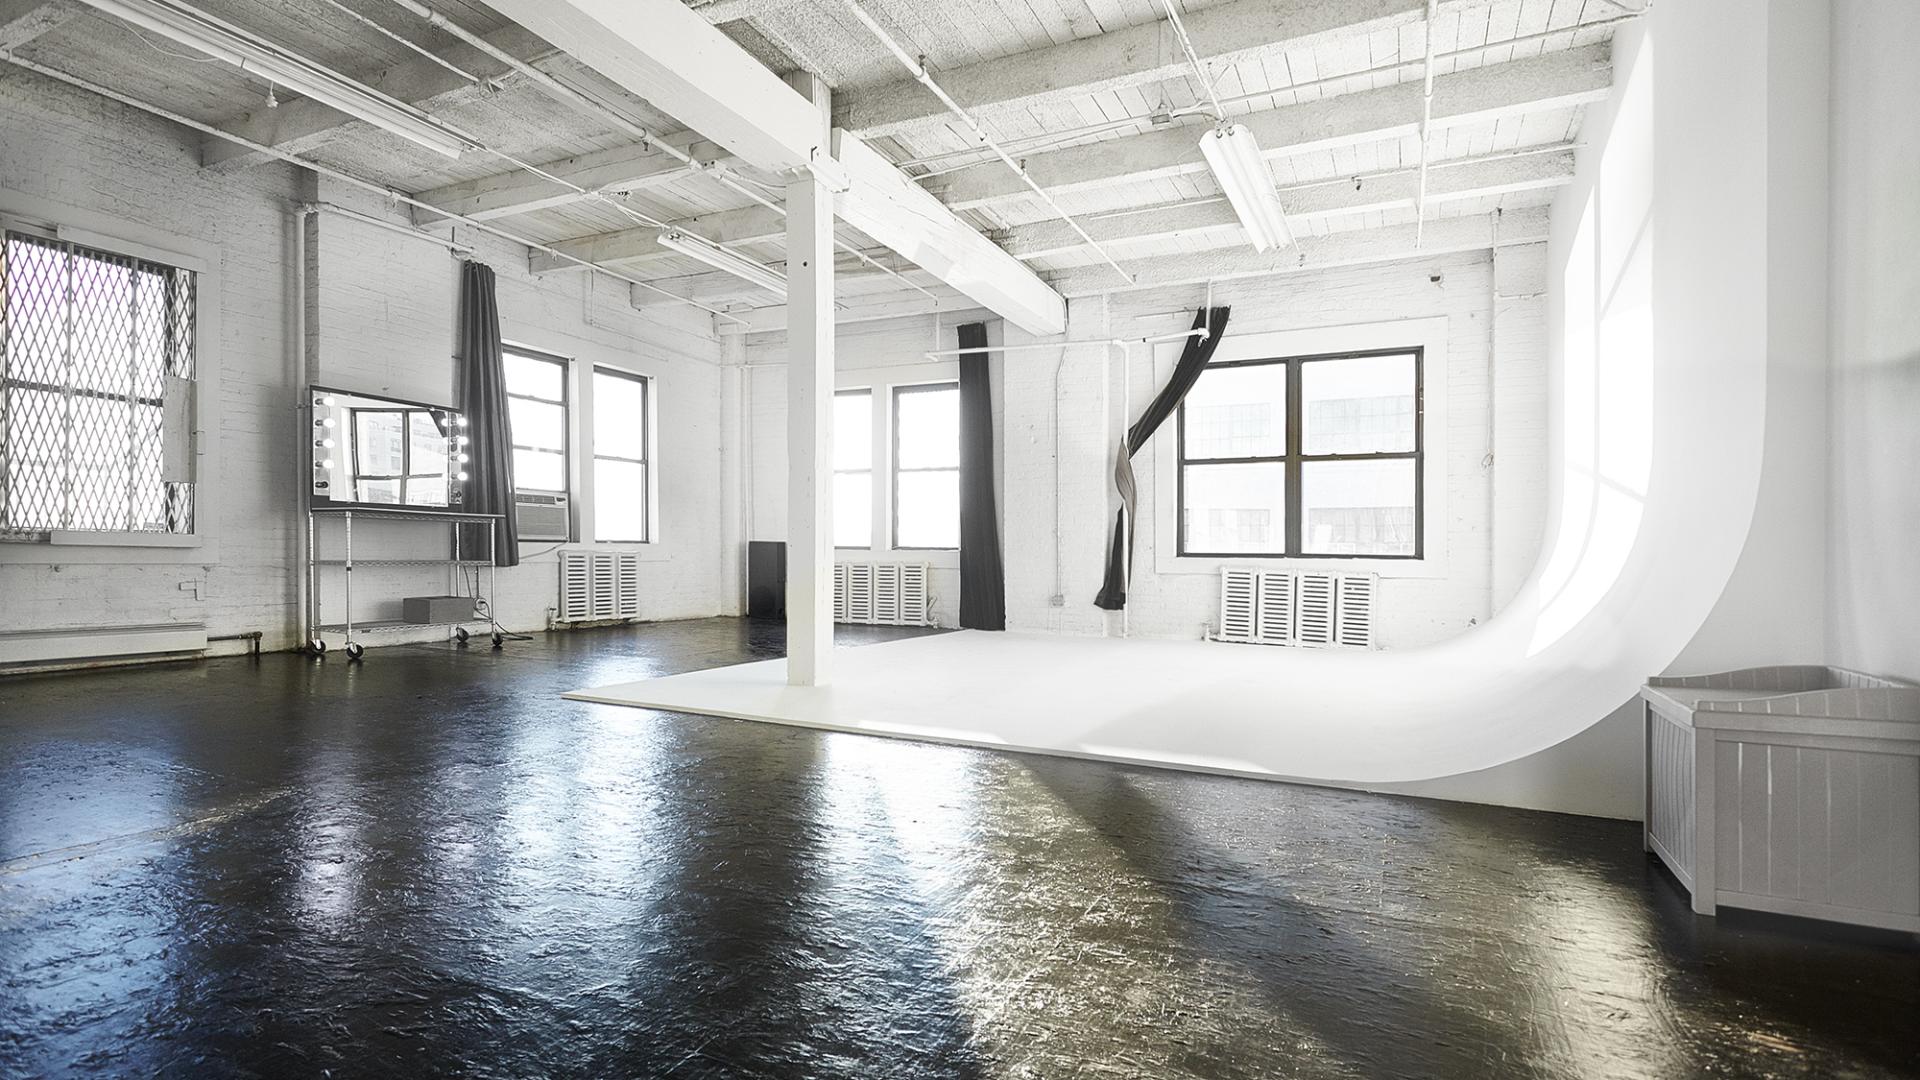 Photo Shoot Locations for Rent in New York City, NY